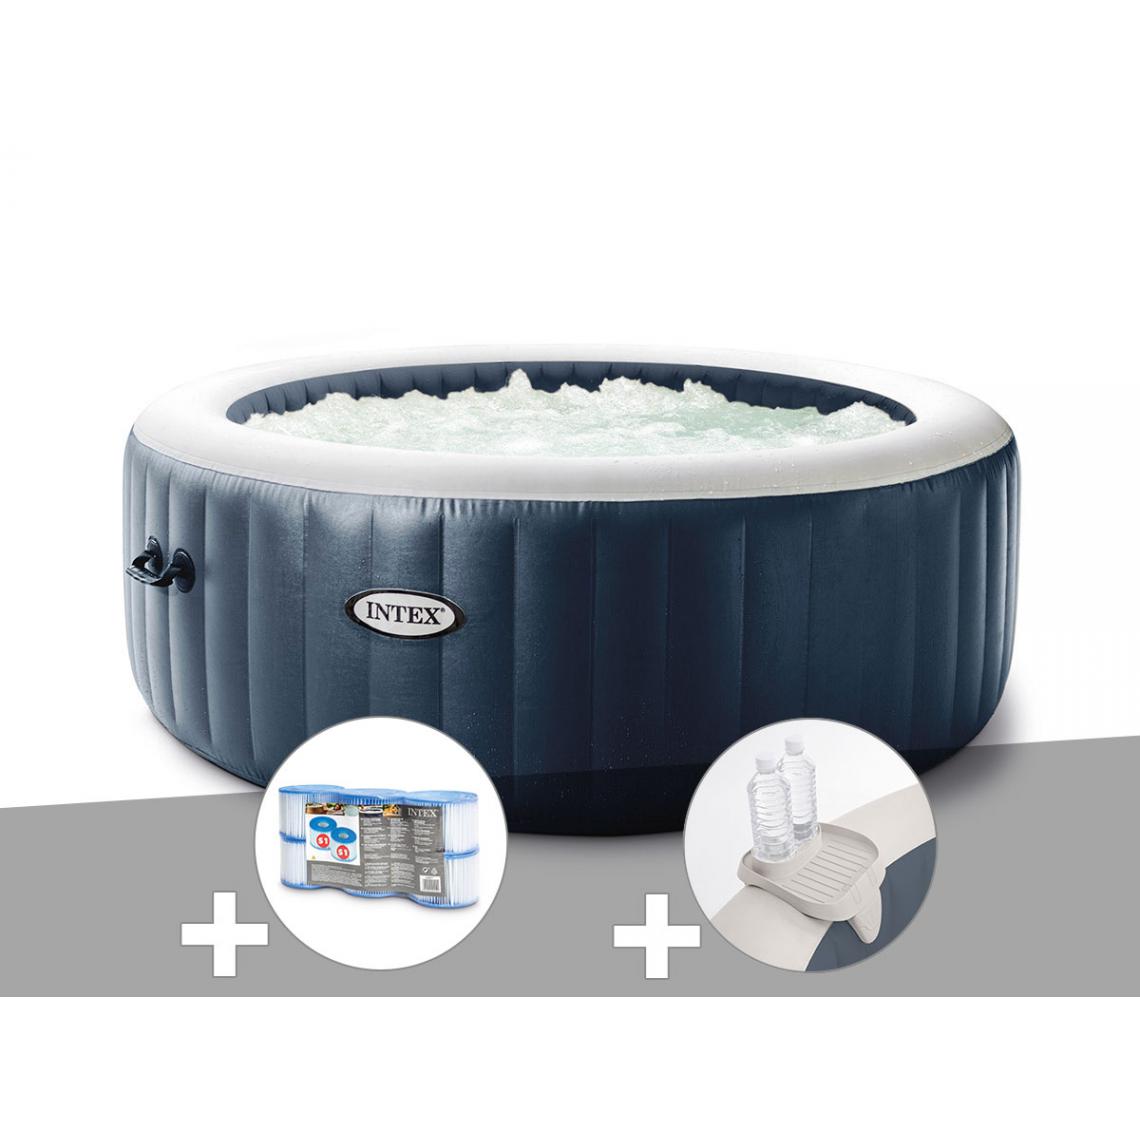 Intex - Kit spa gonflable Intex PureSpa Blue Navy rond Bulles 4 places + 6 filtres + Porte-verre - Spa gonflable